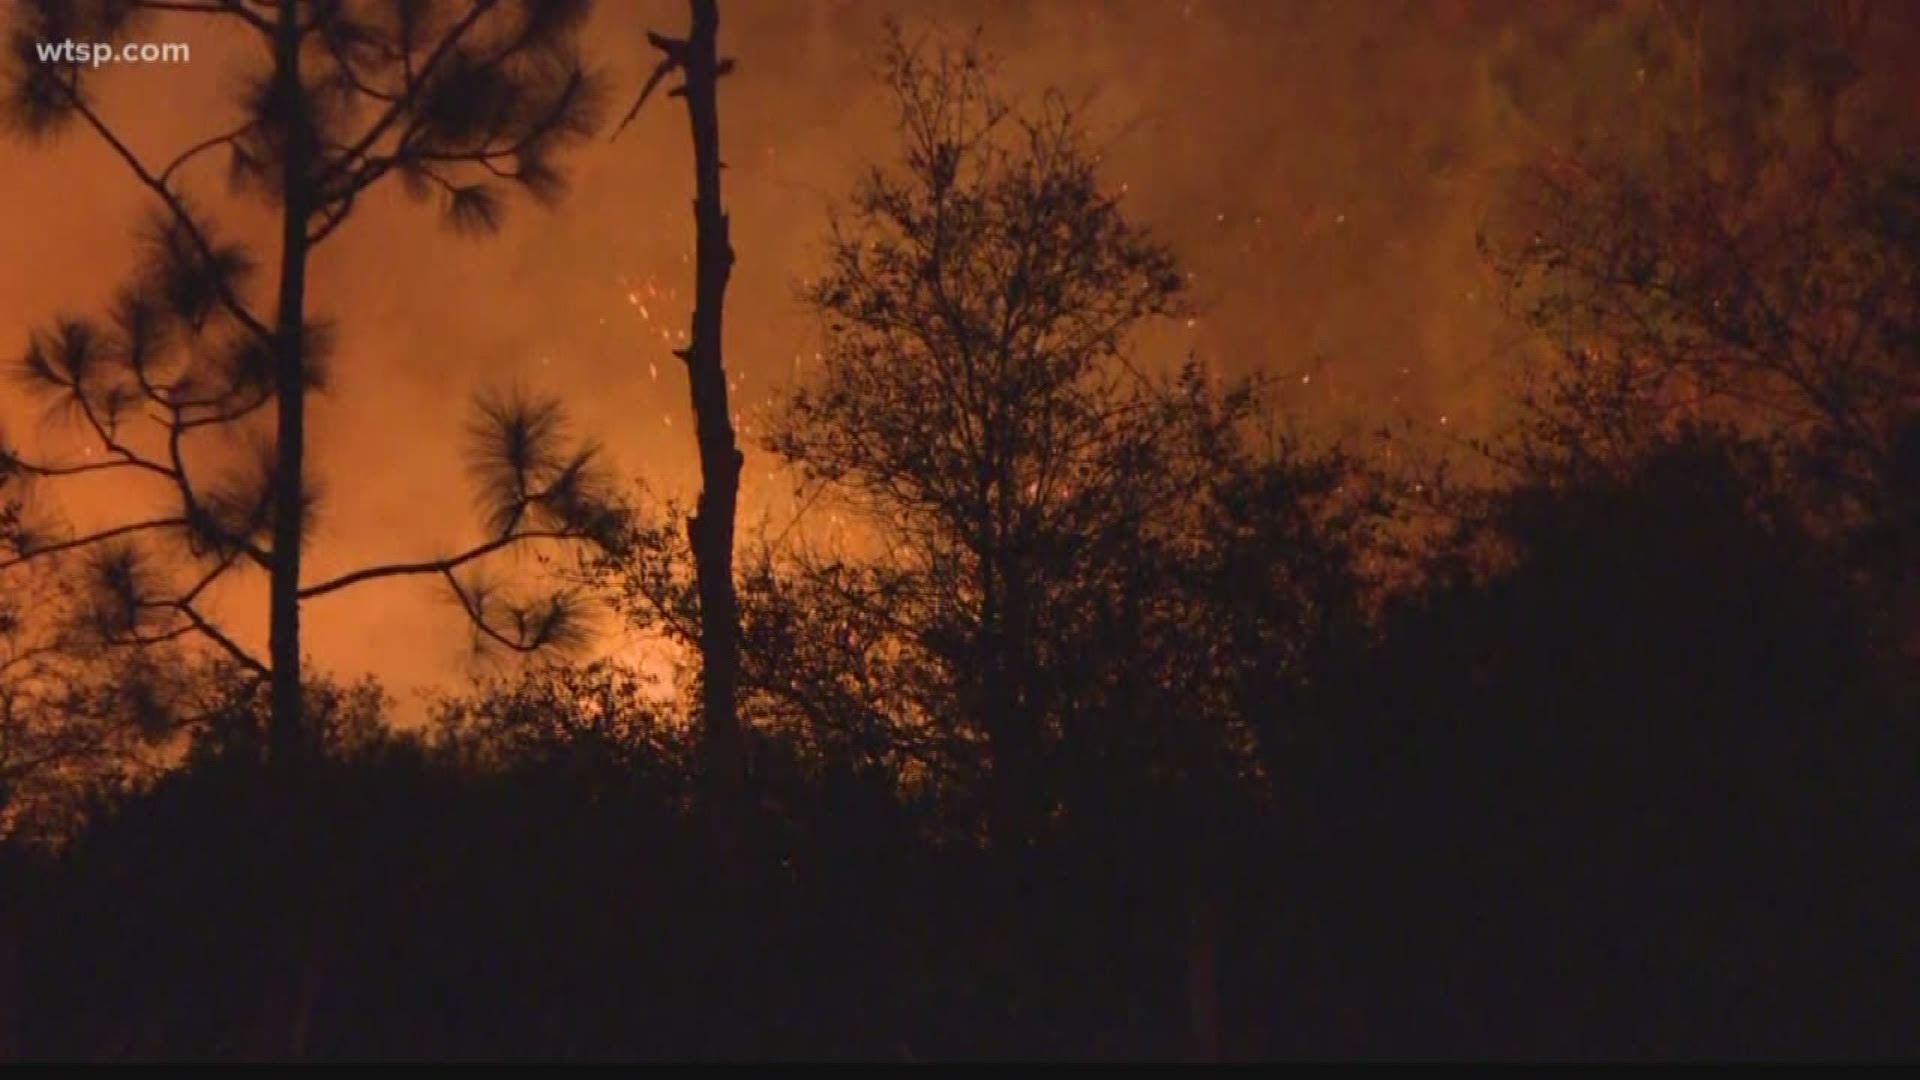 The fire is located north of the Longleaf subdivision in New Port Richey.